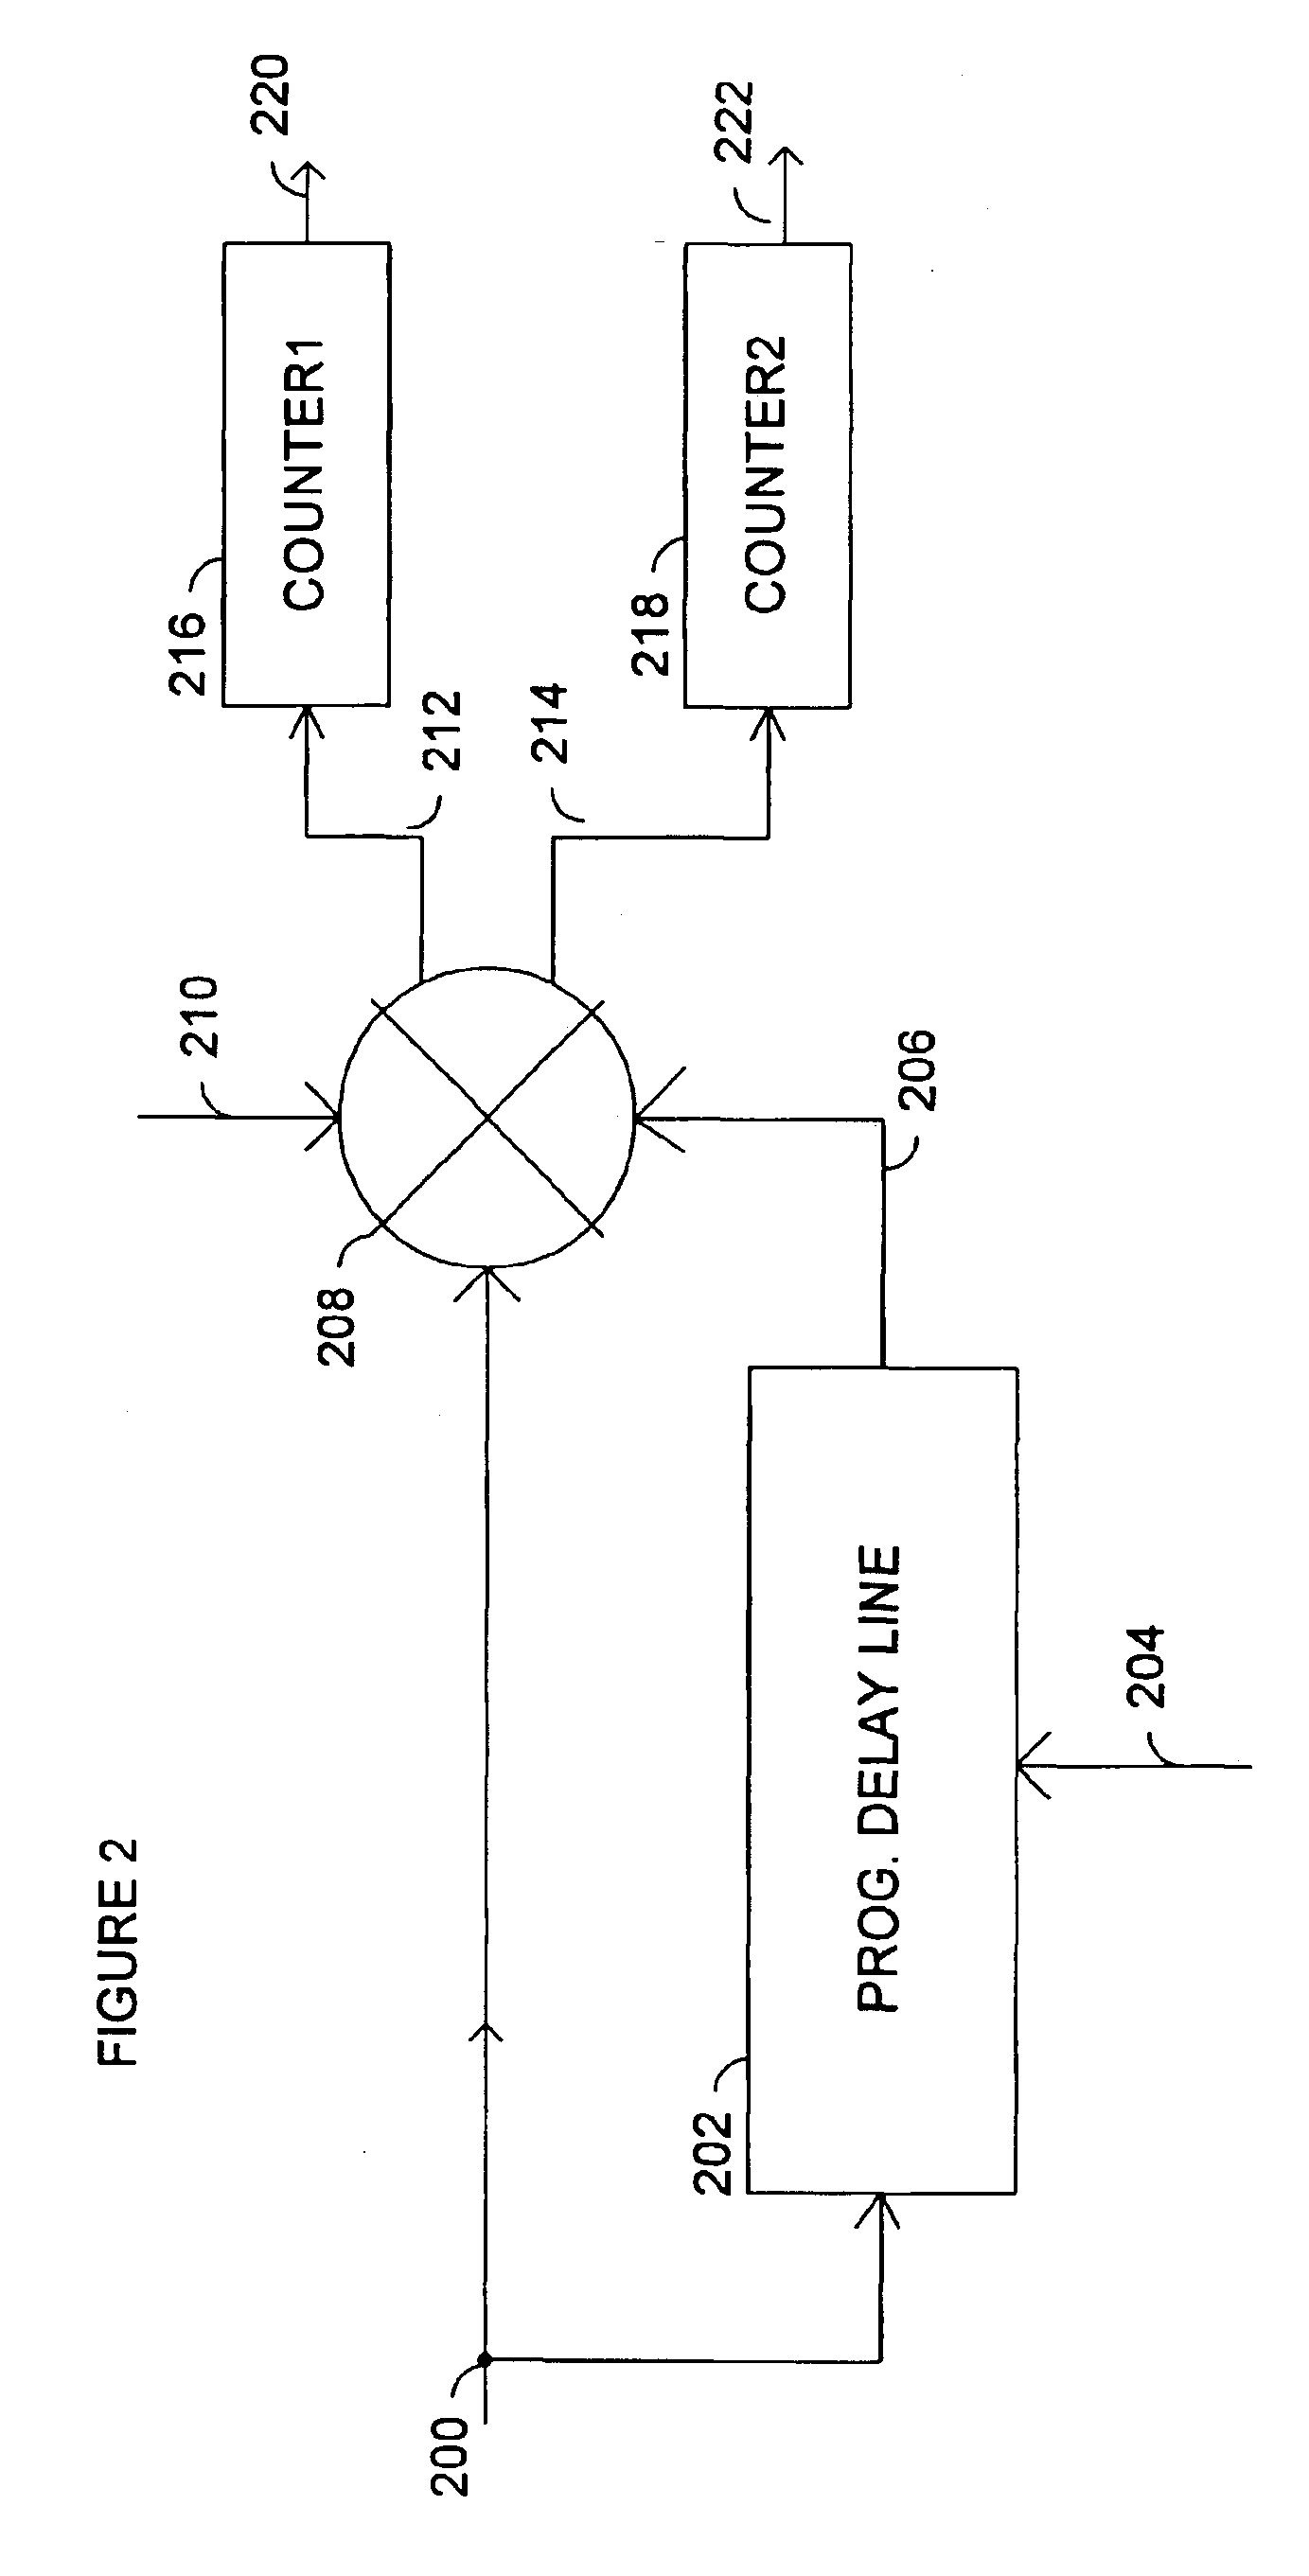 Method and circuit for measuring on-chip, cycle-to-cycle clock jitter